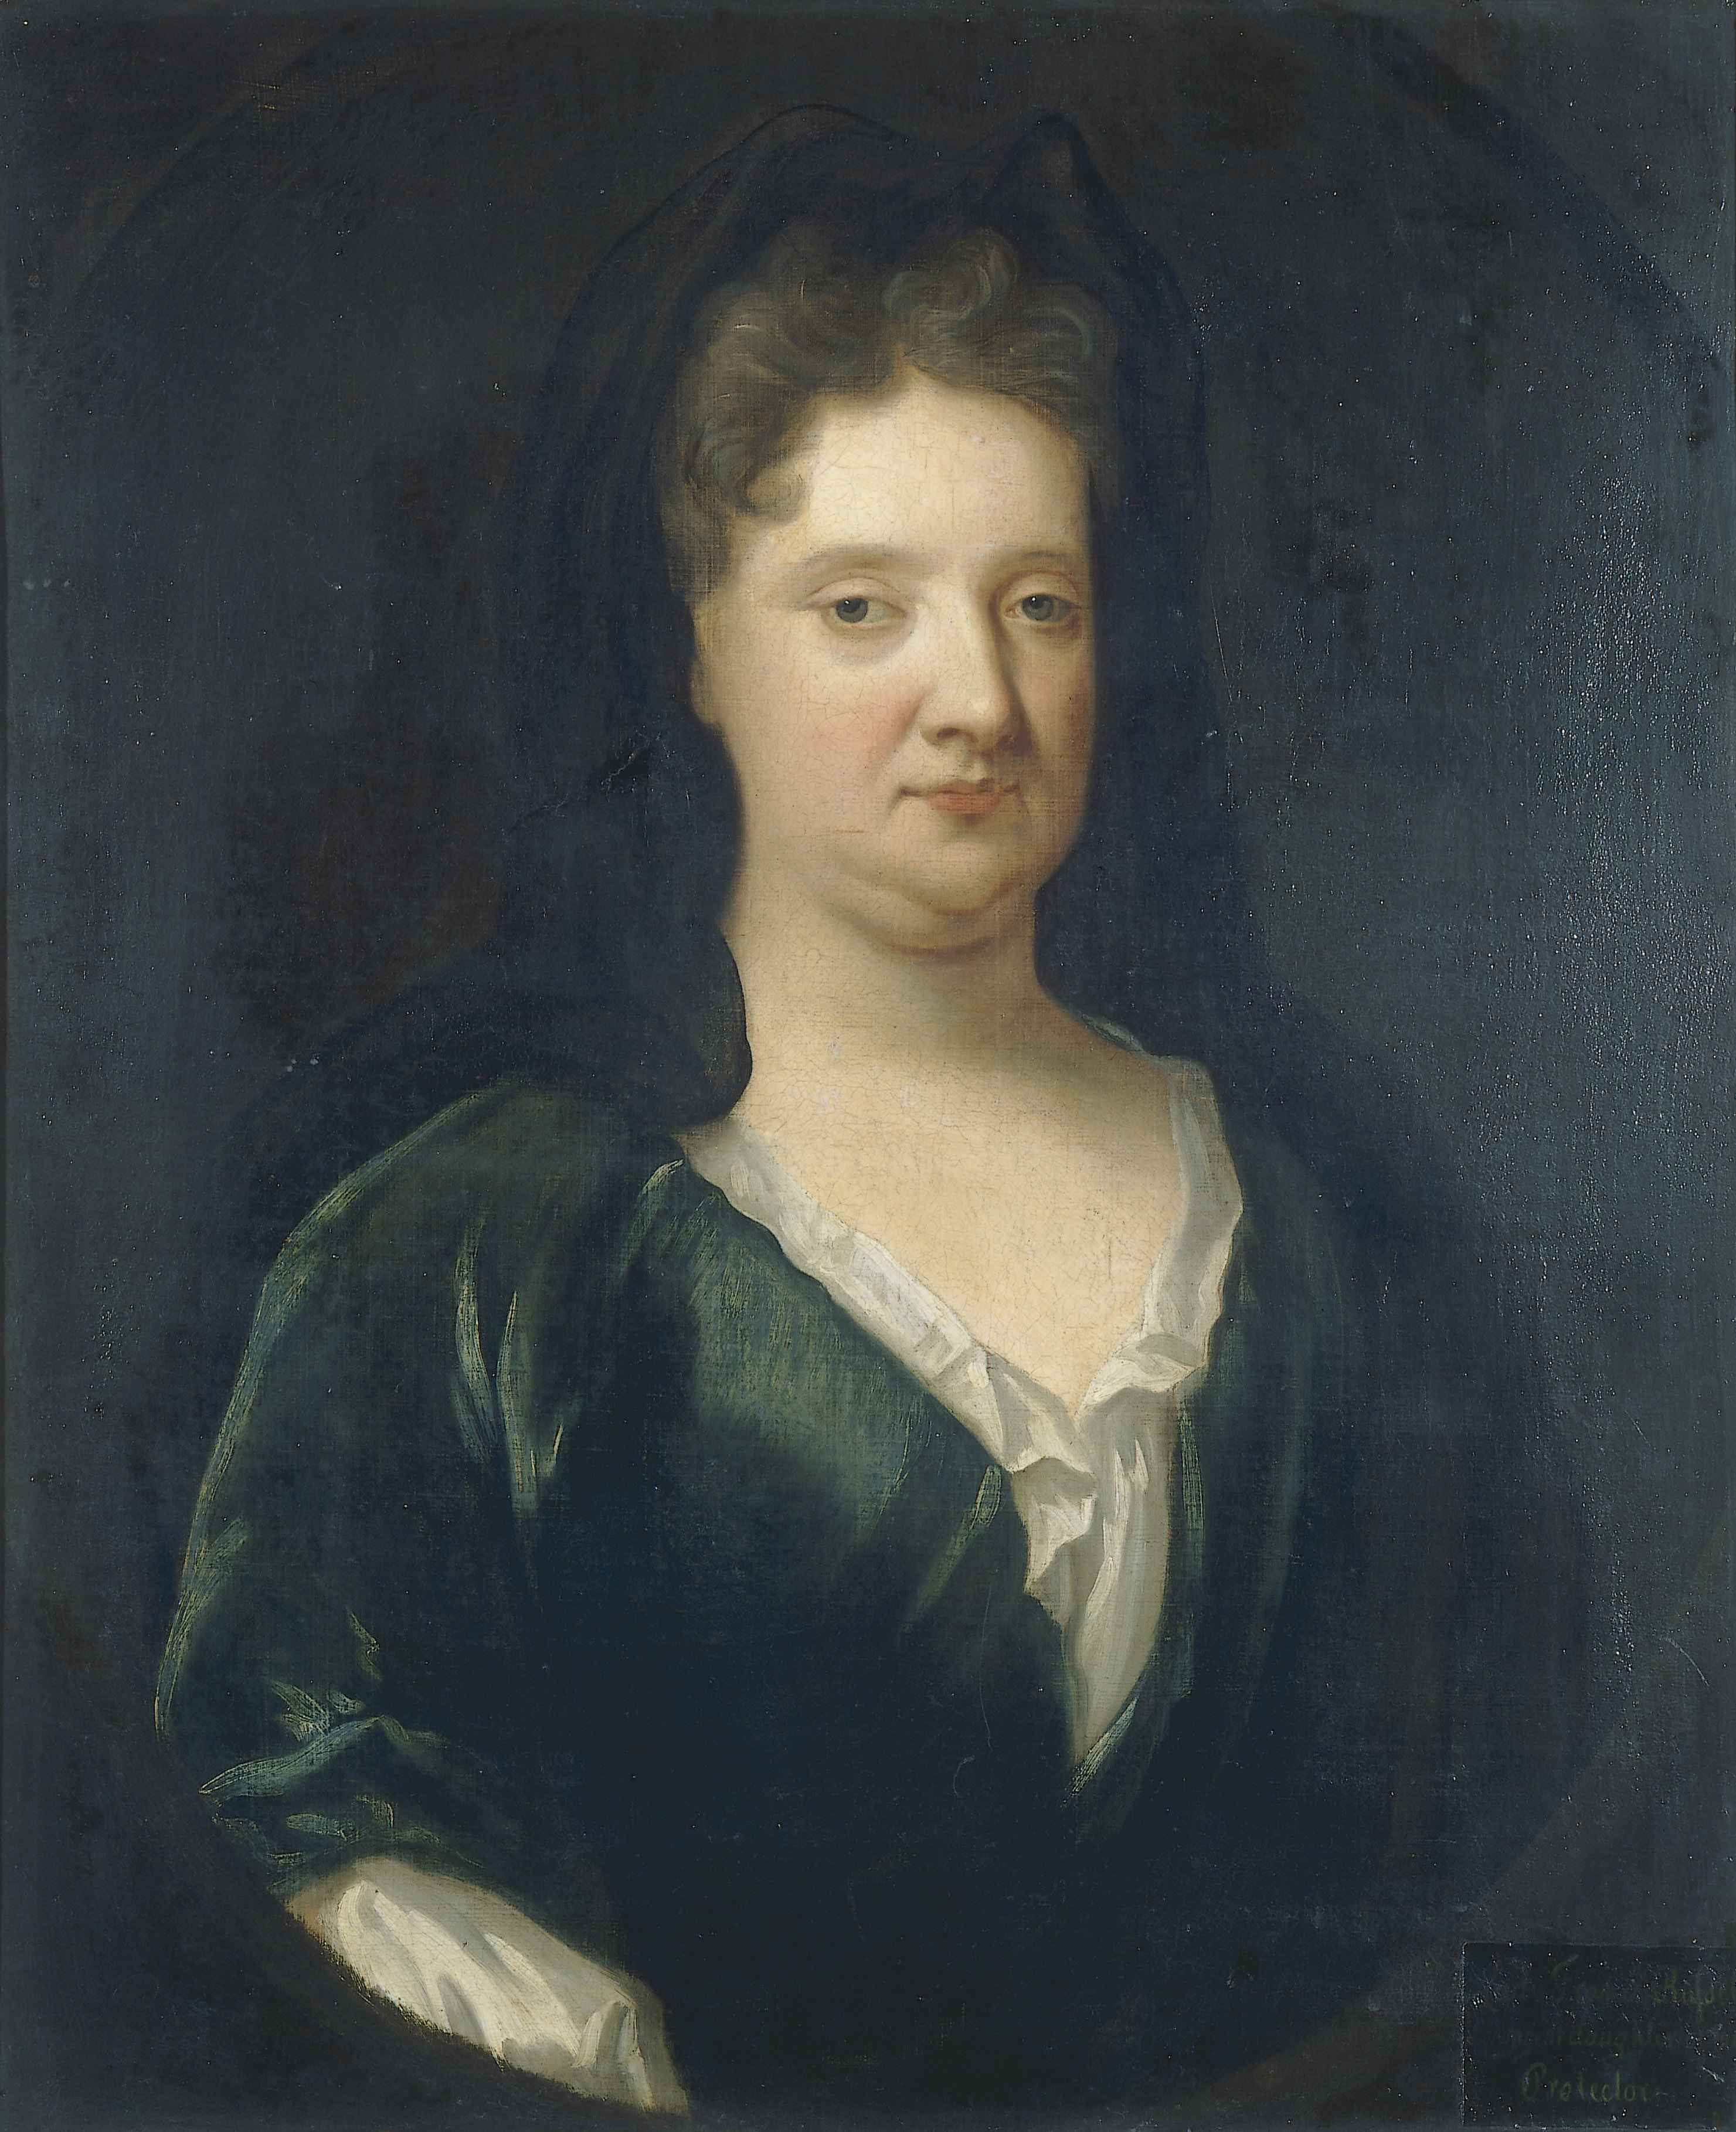 Portrait of Lady Frances Russell (Cromwell) by John Riley, c. 1670, Oil on Canvas. thumbnail